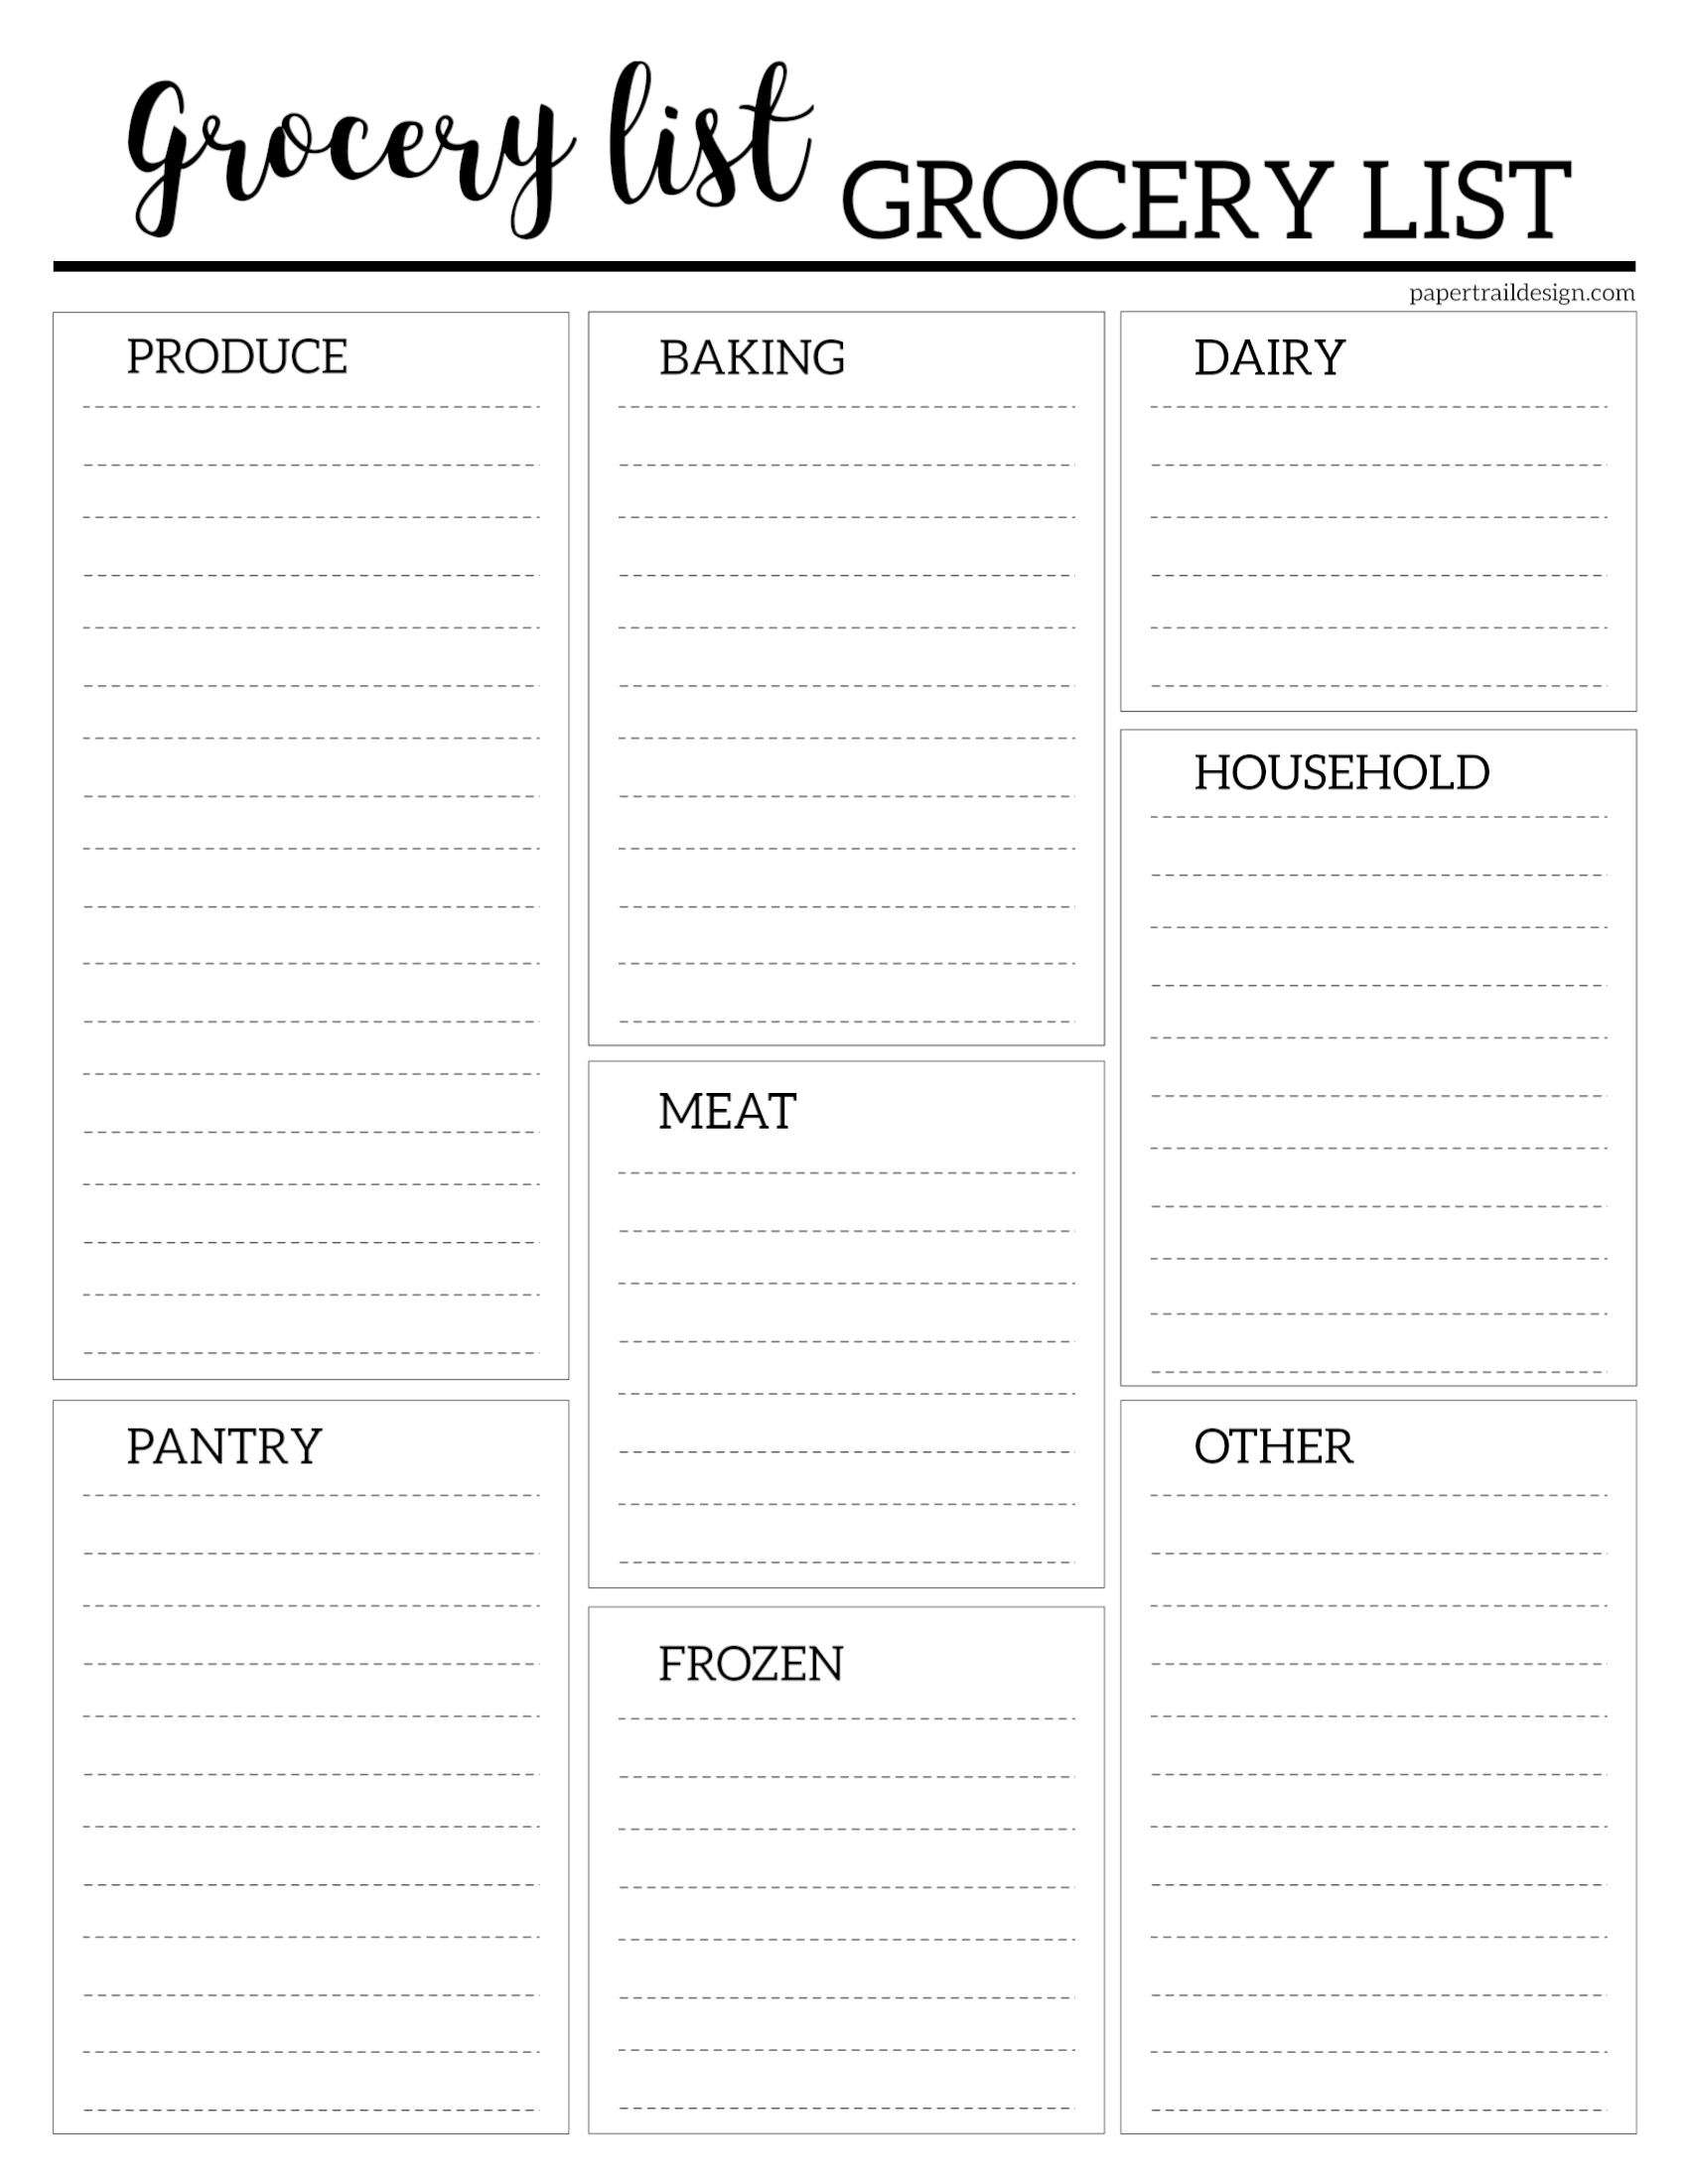 Grocery List By Category